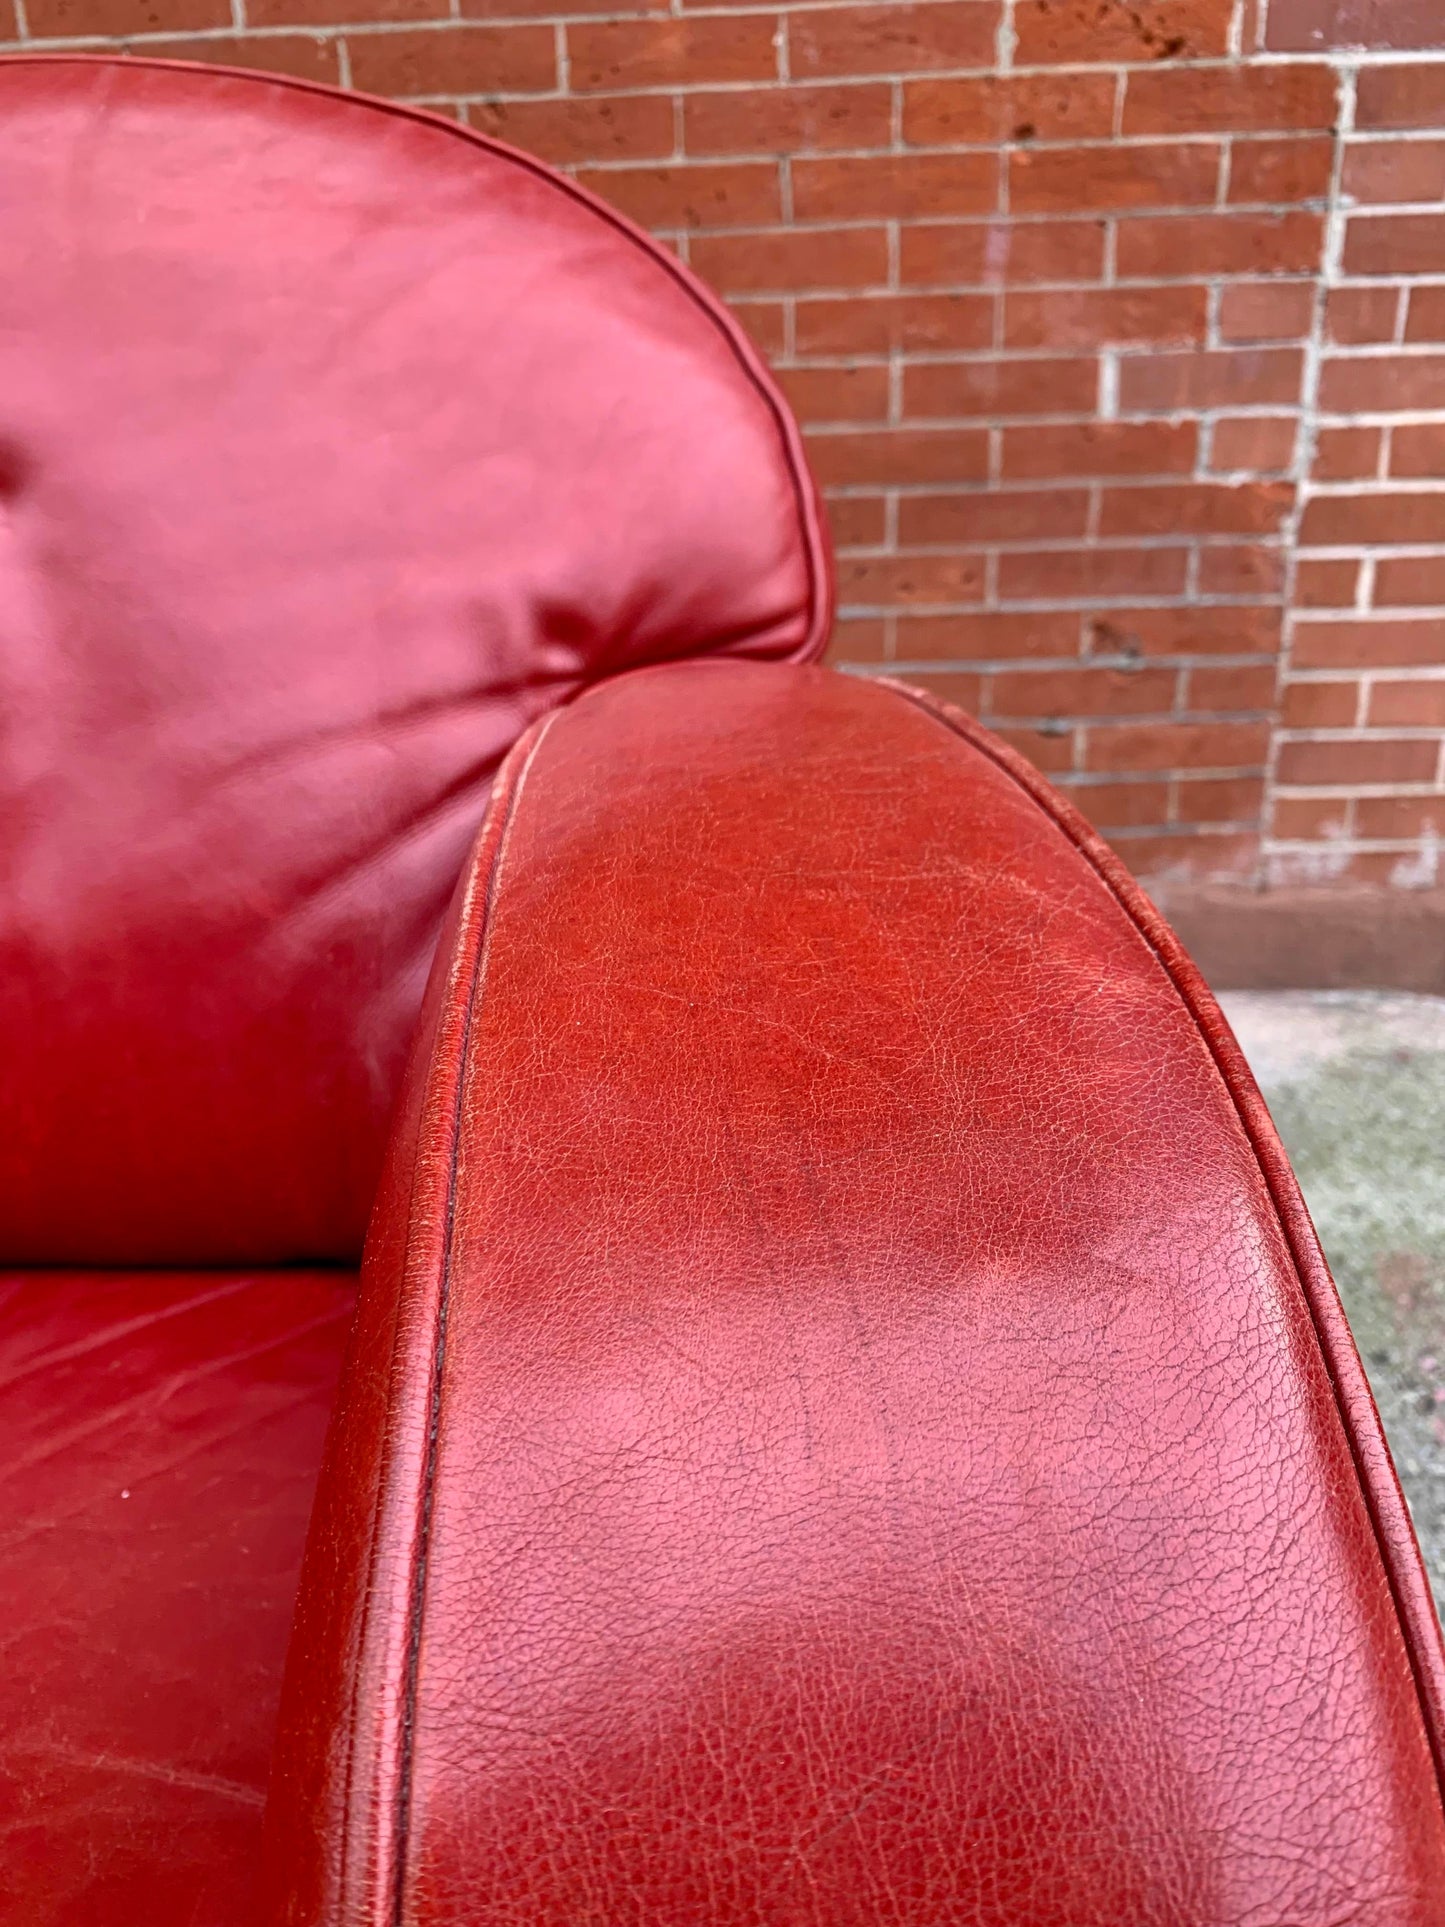 1940s Art Deco Style French Leather Club Chair